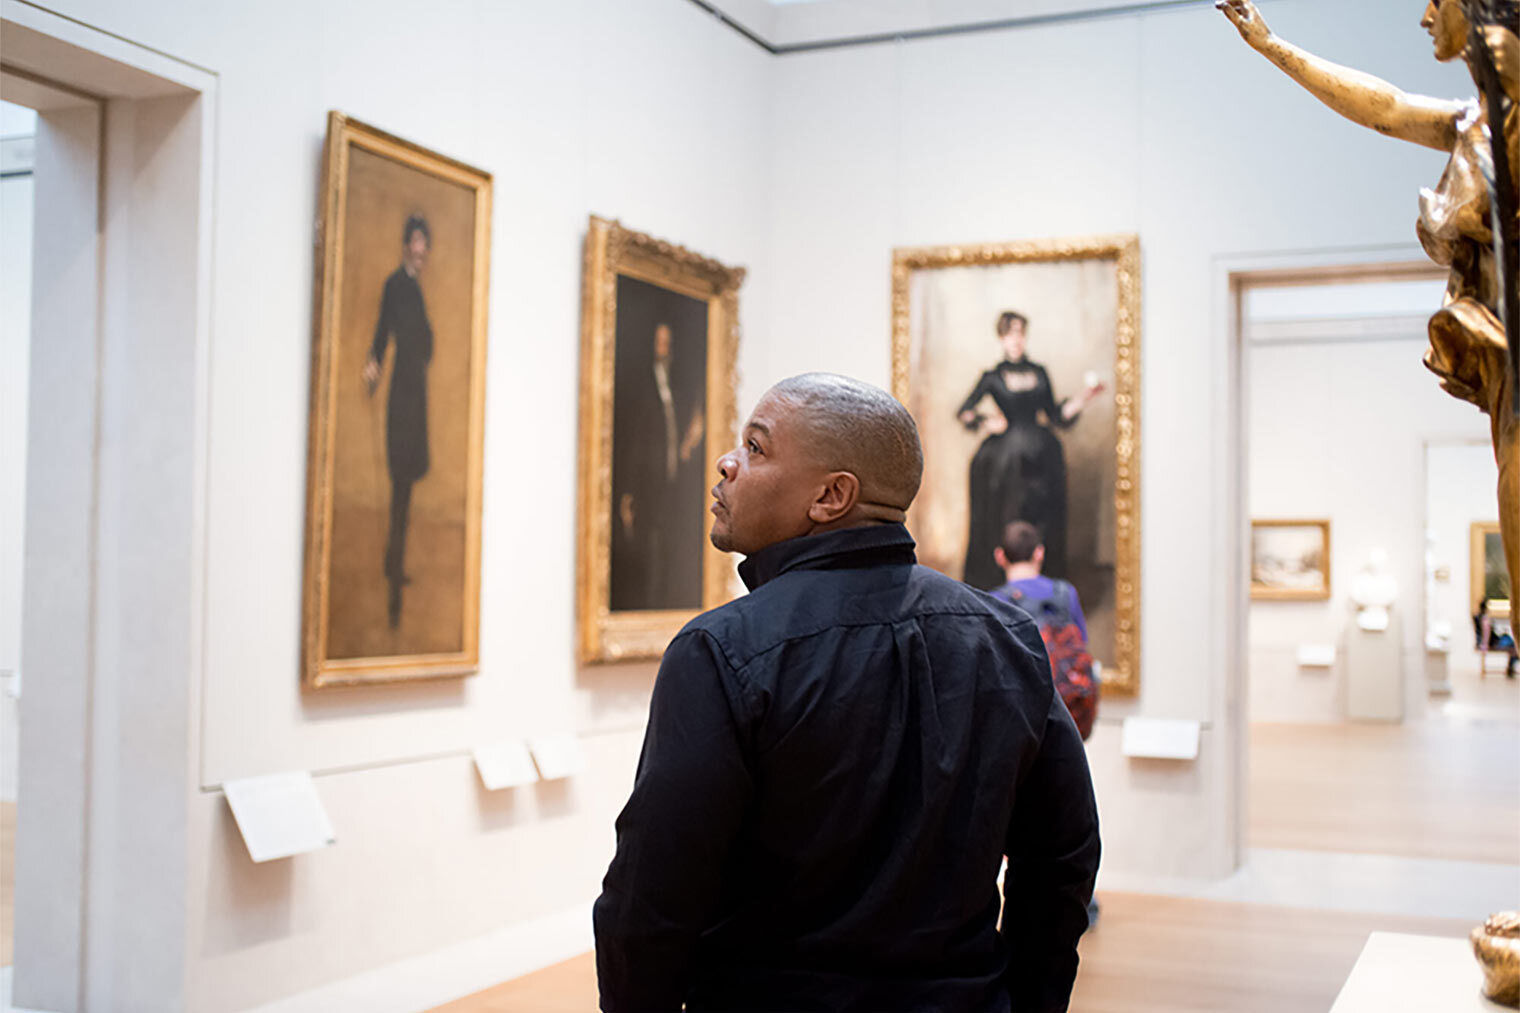 The artist Kehinde Wiley walks through a gallery of portraits by Sargent